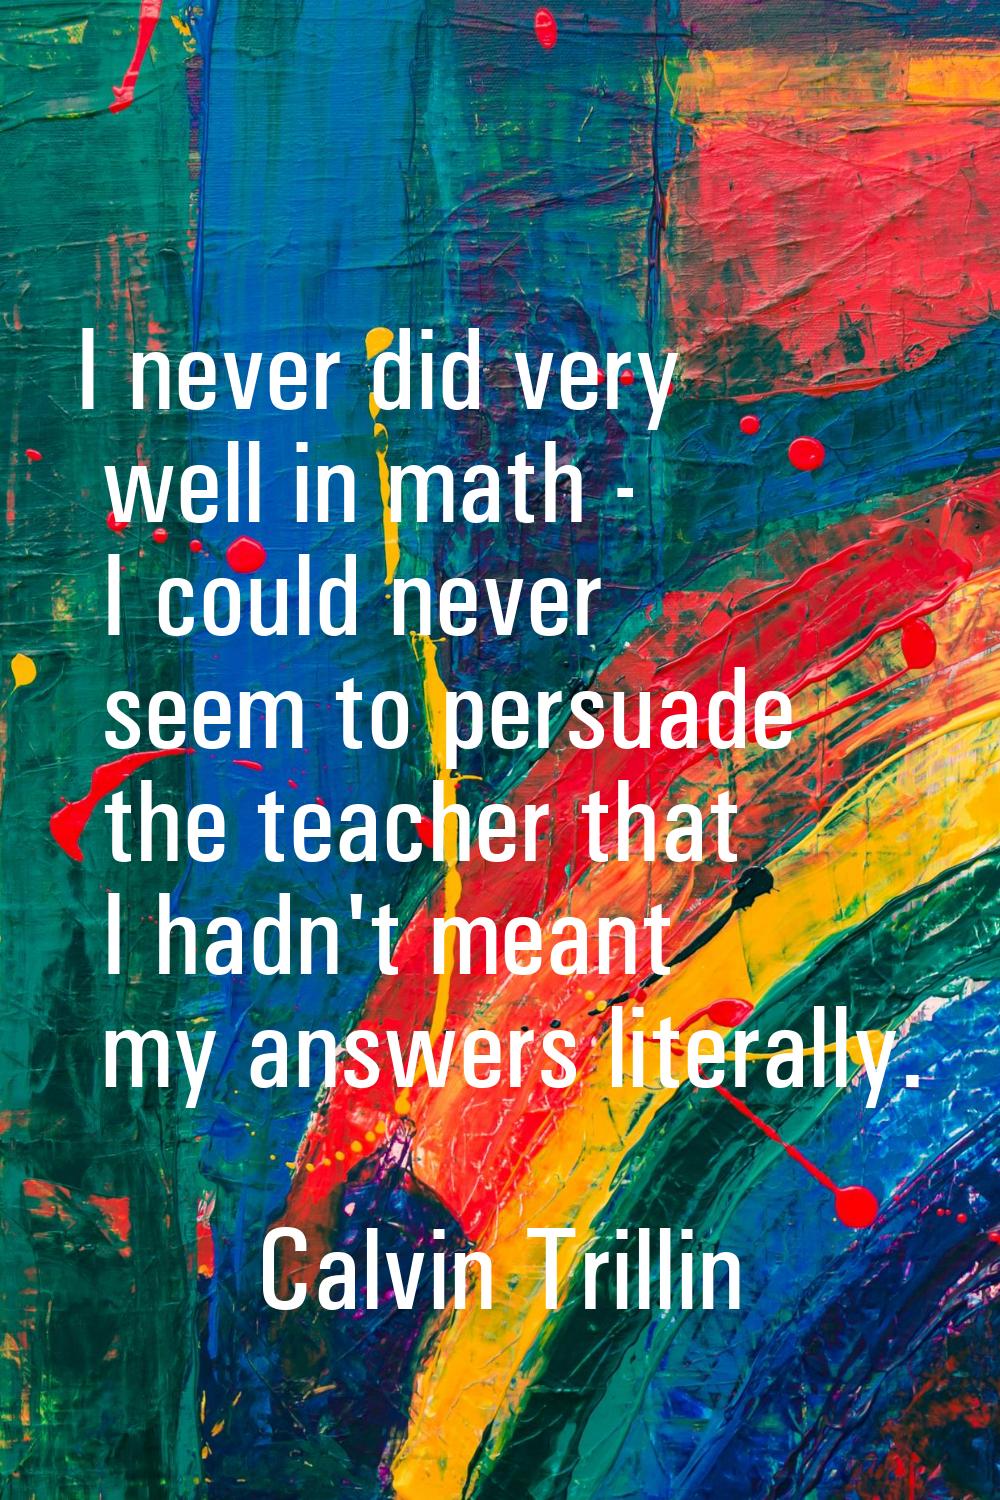 I never did very well in math - I could never seem to persuade the teacher that I hadn't meant my a